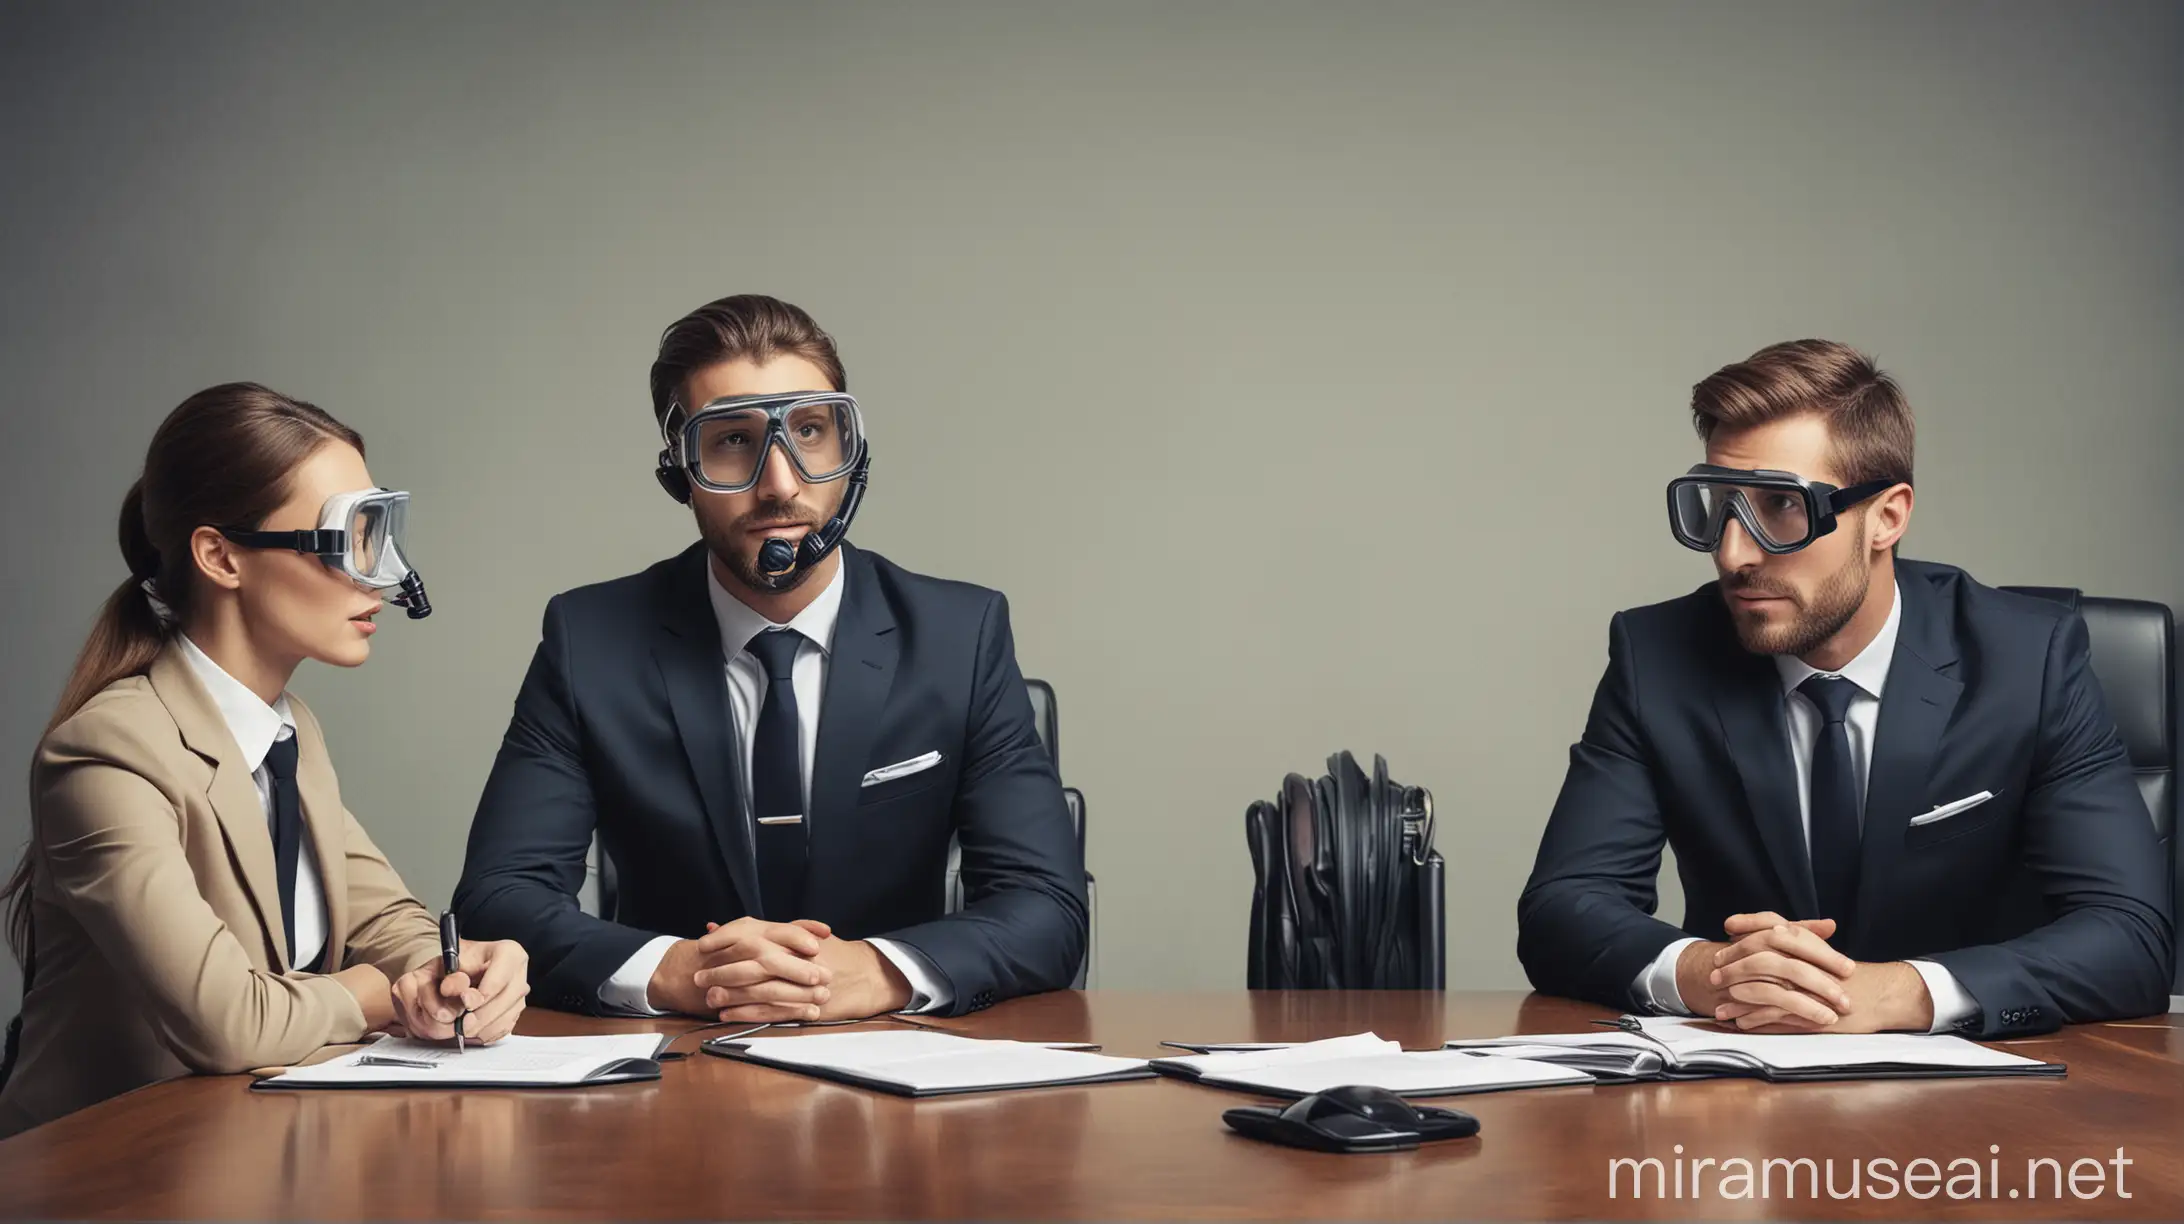 /imagine a suited man wearing in a meeting wearing a snorkel